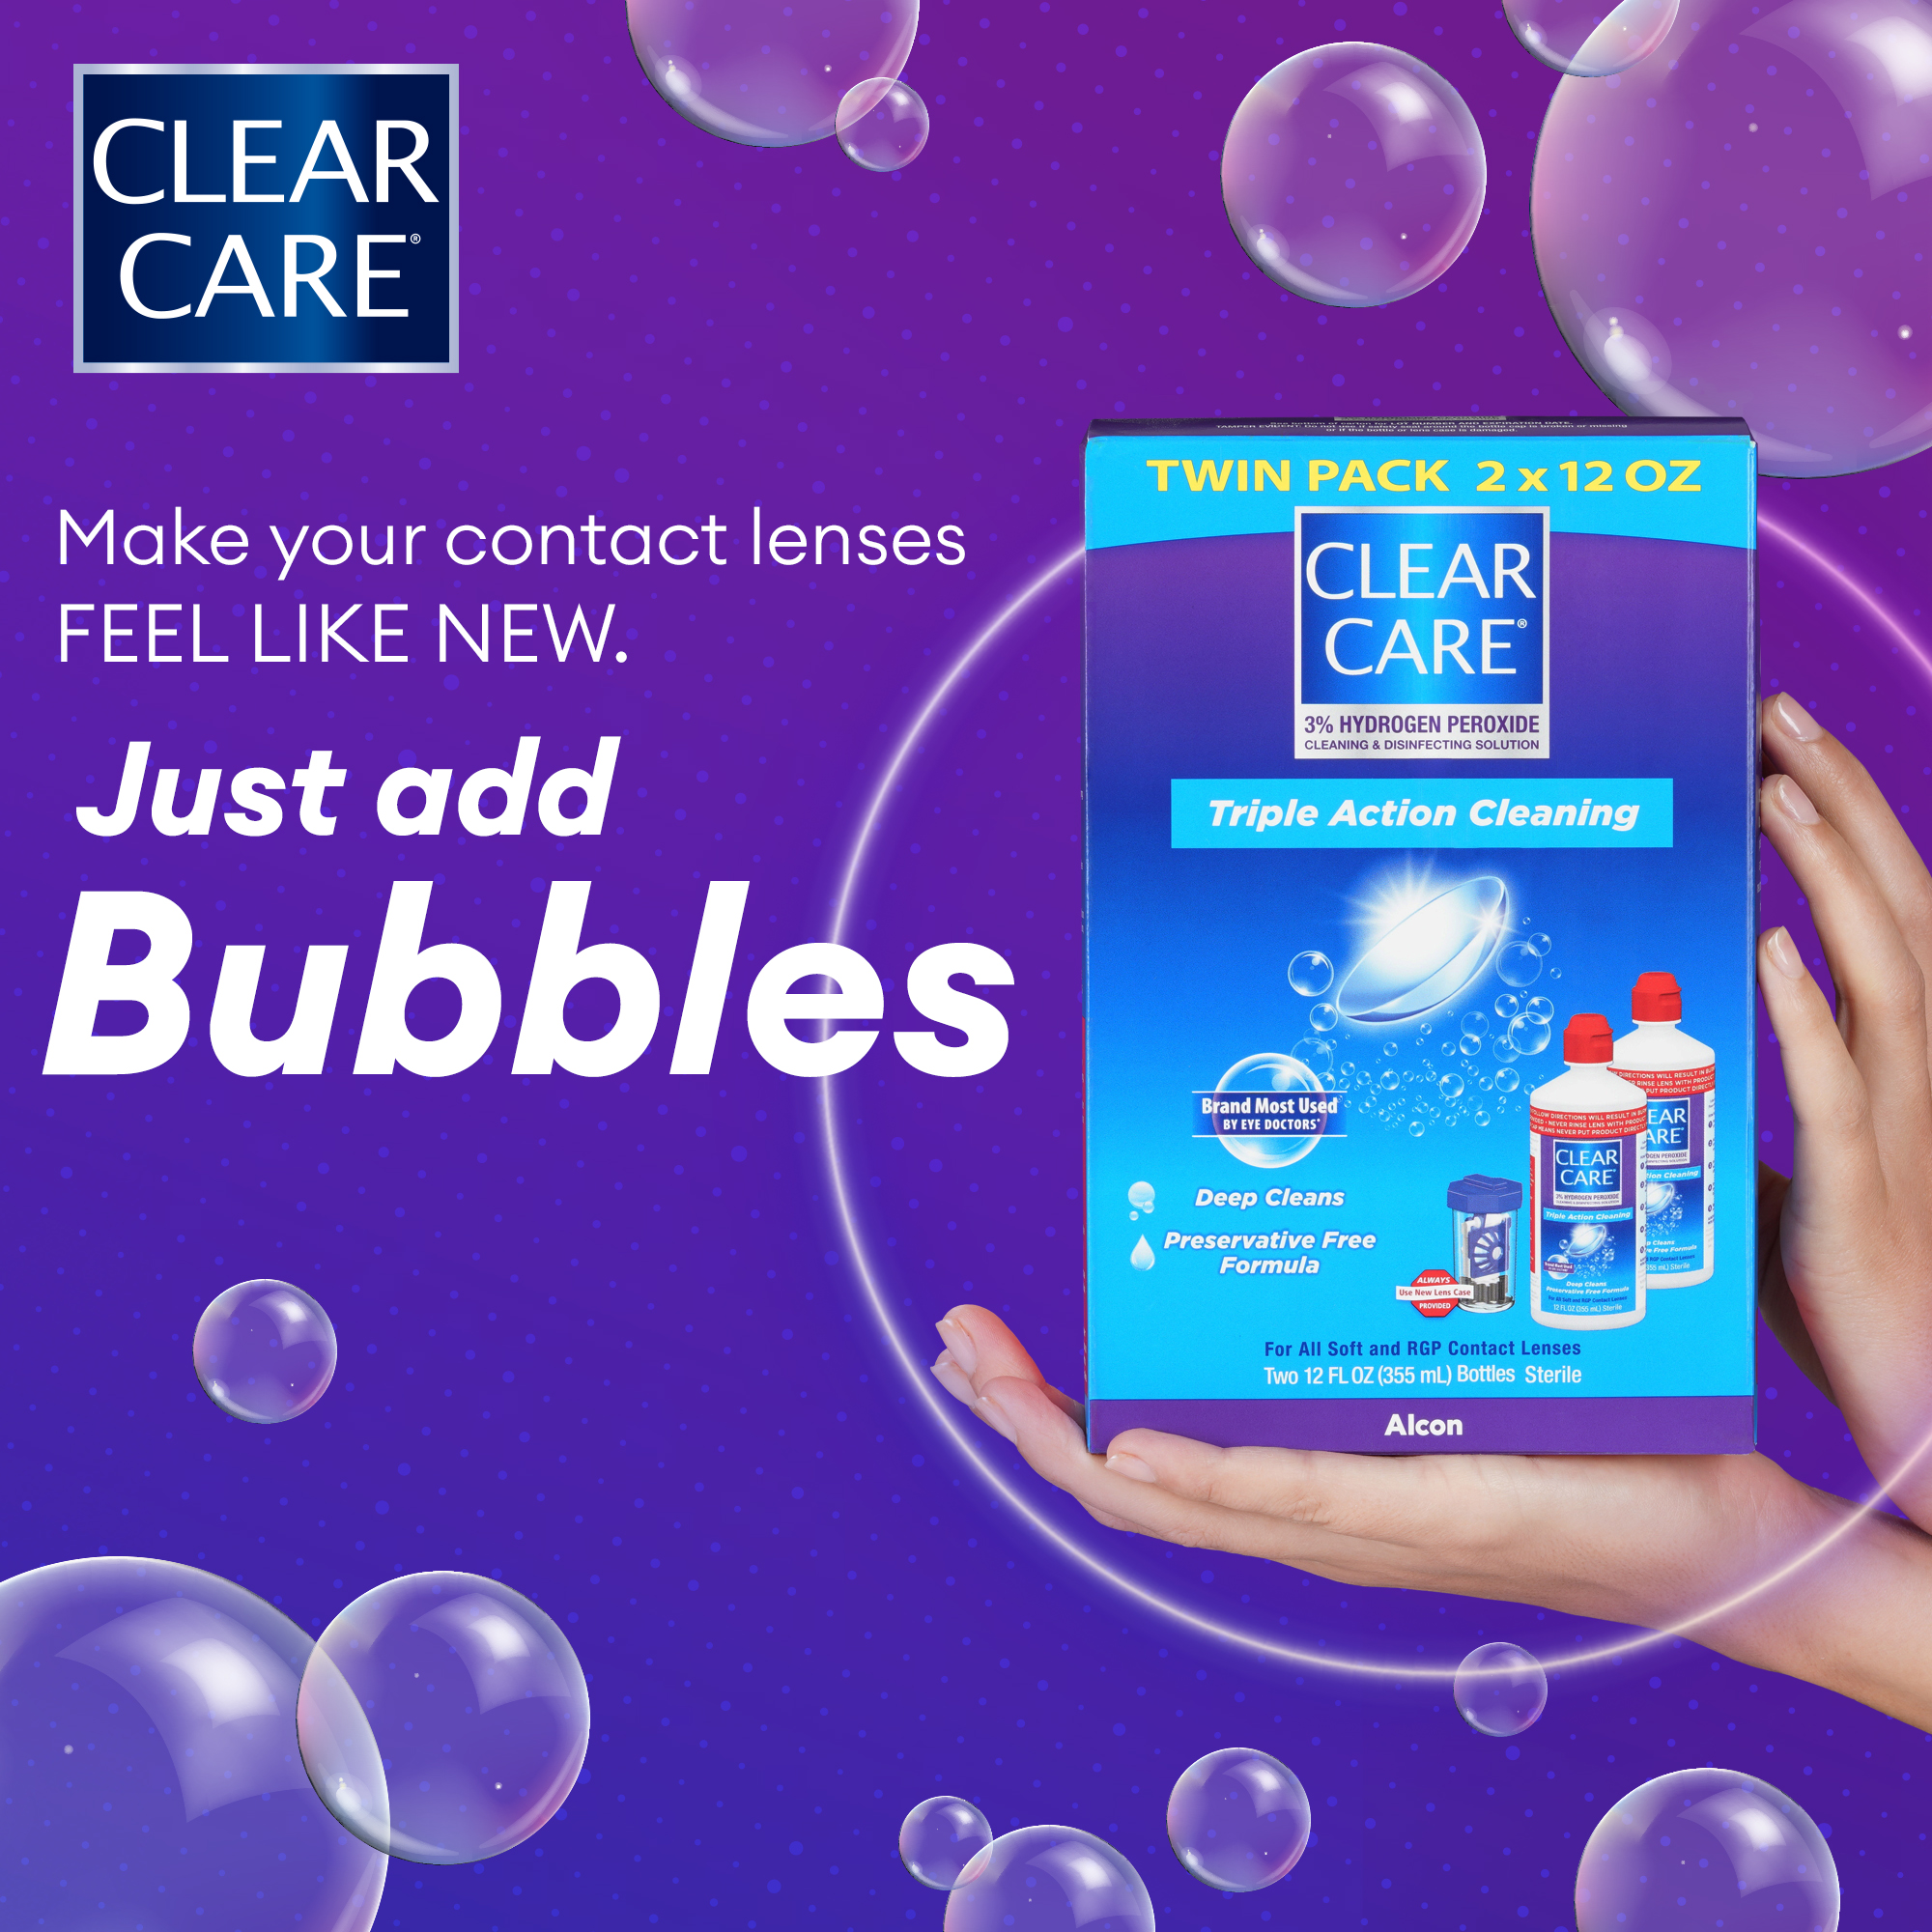 Clear Care Hydrogen Peroxide Contact Lens Cleaning and Disinfecting Liquid Solution, Two 12 oz per pack - image 3 of 9